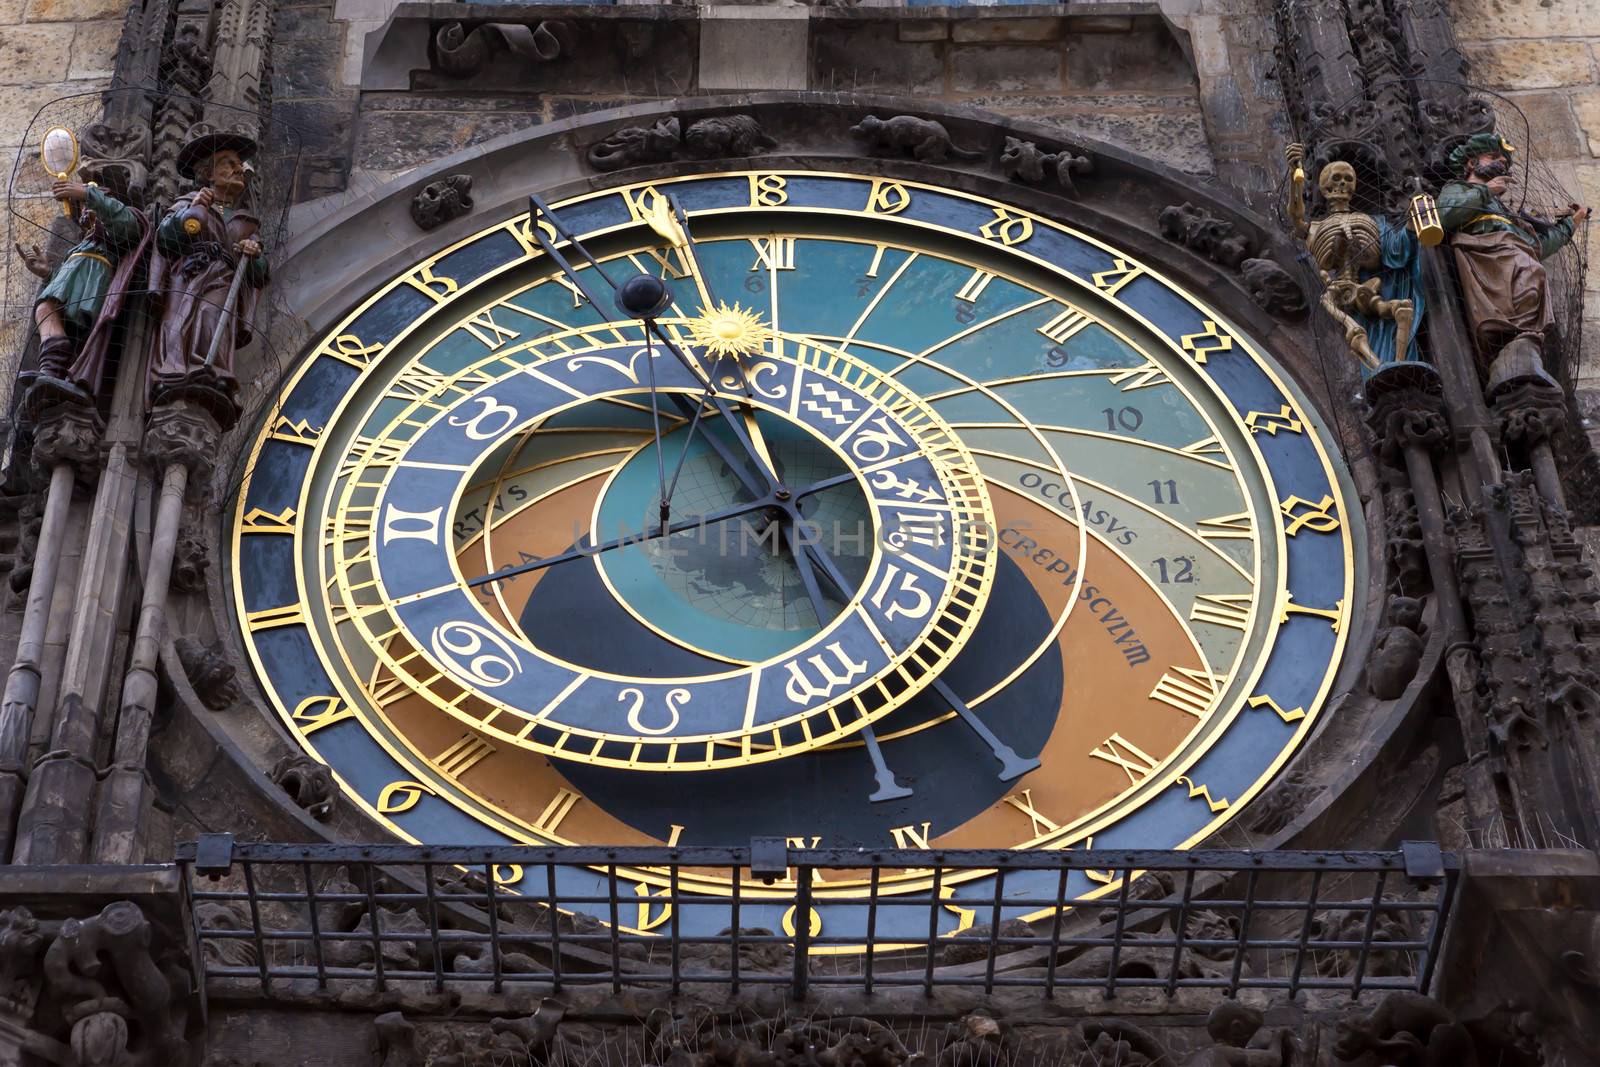 The astronomical clock situated on the wall of the old town city hall in Prague. The center section (astronomical dial) dates back to 1410, and around 1490 sculptures and the calender dial was added to it.